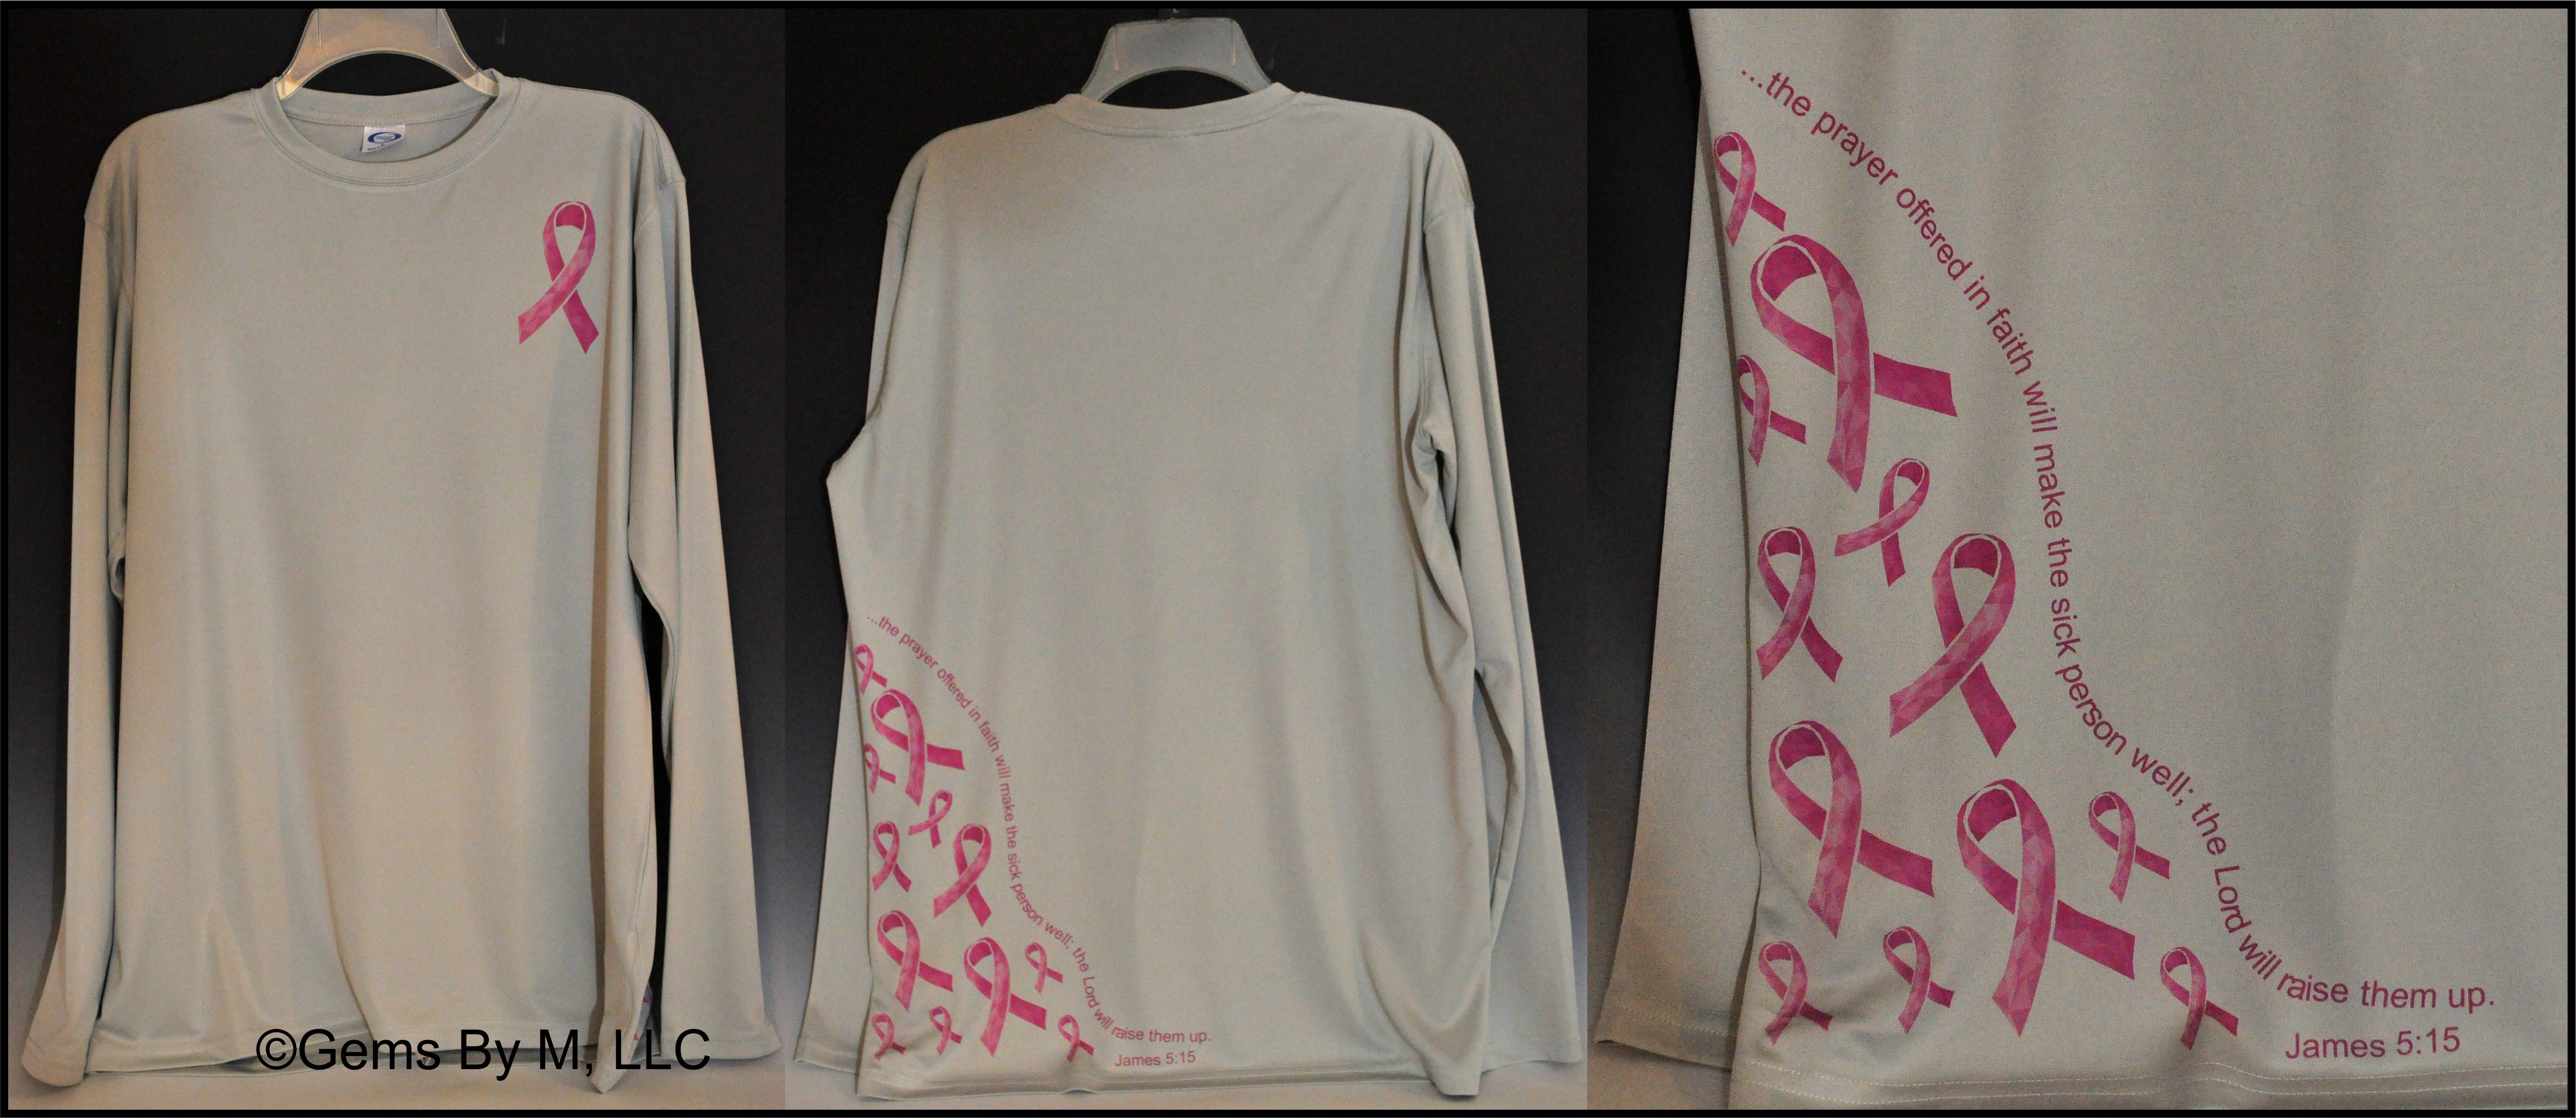 Breast Cancer Shirt made with sublimation printing